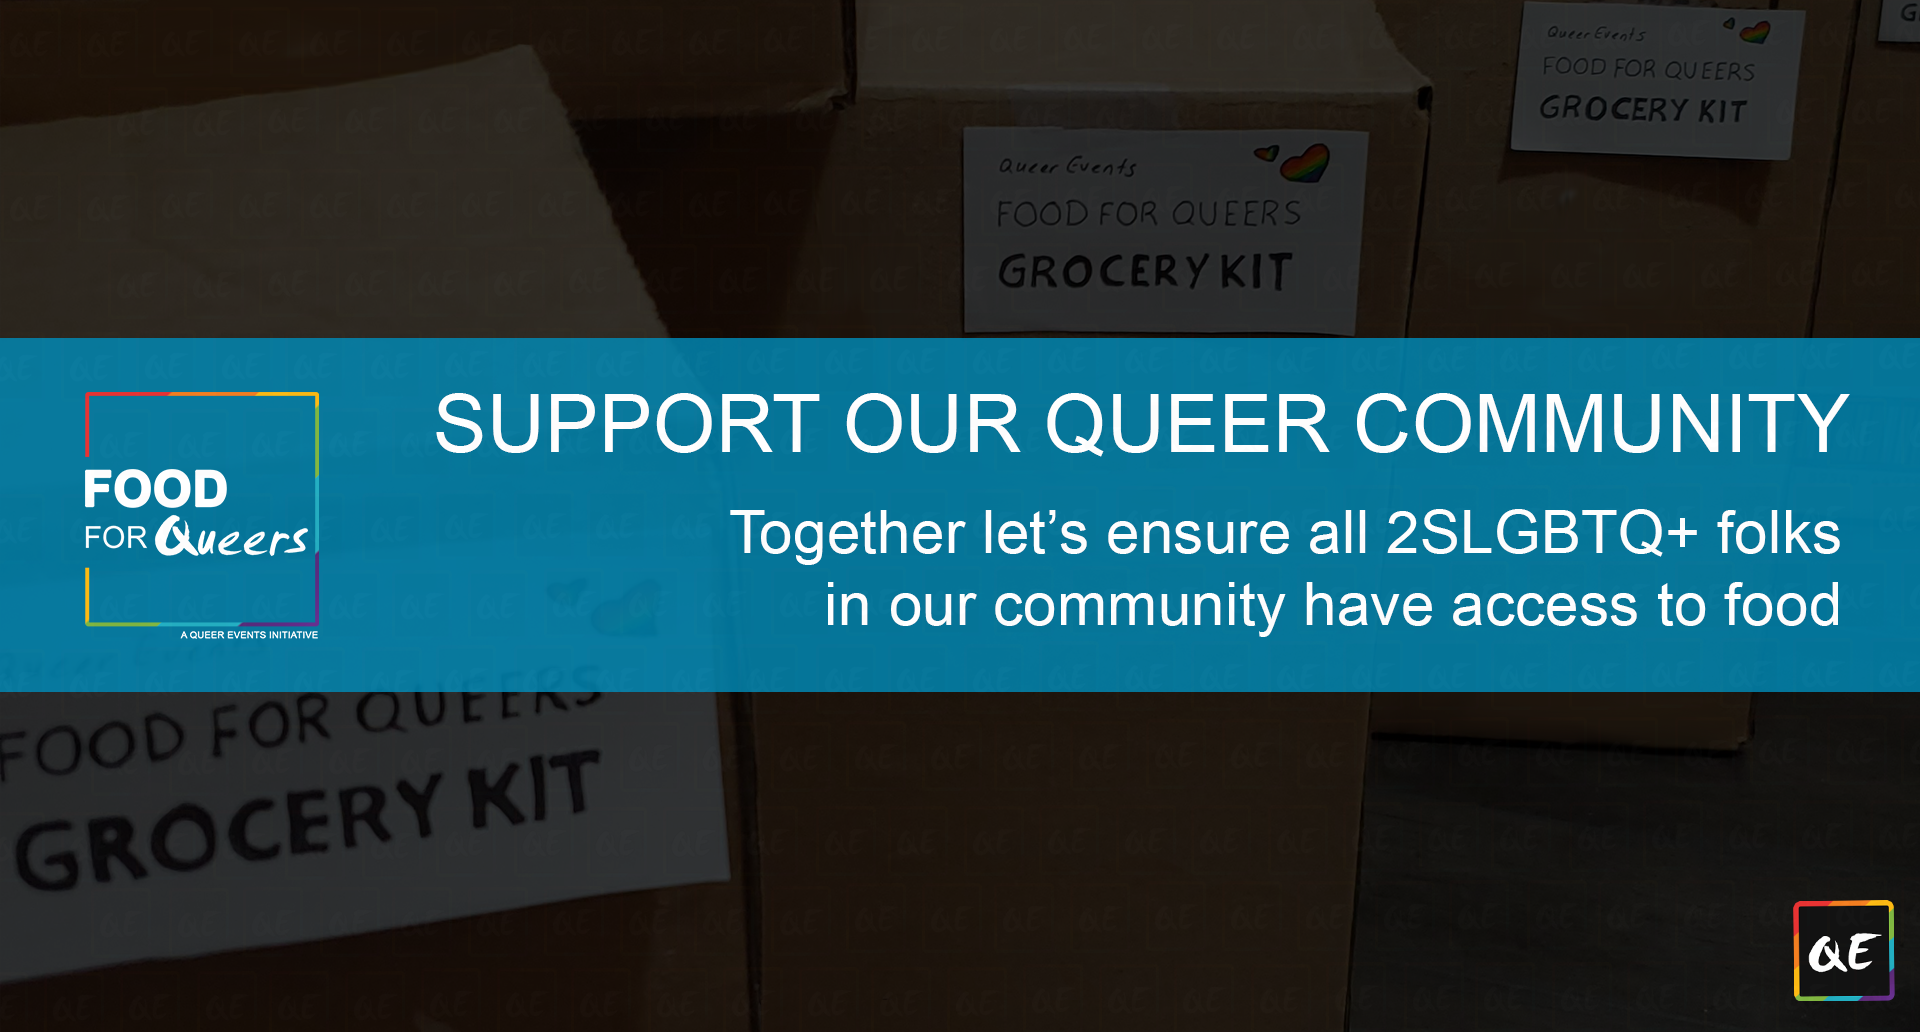 queerevents.ca -support food for queers